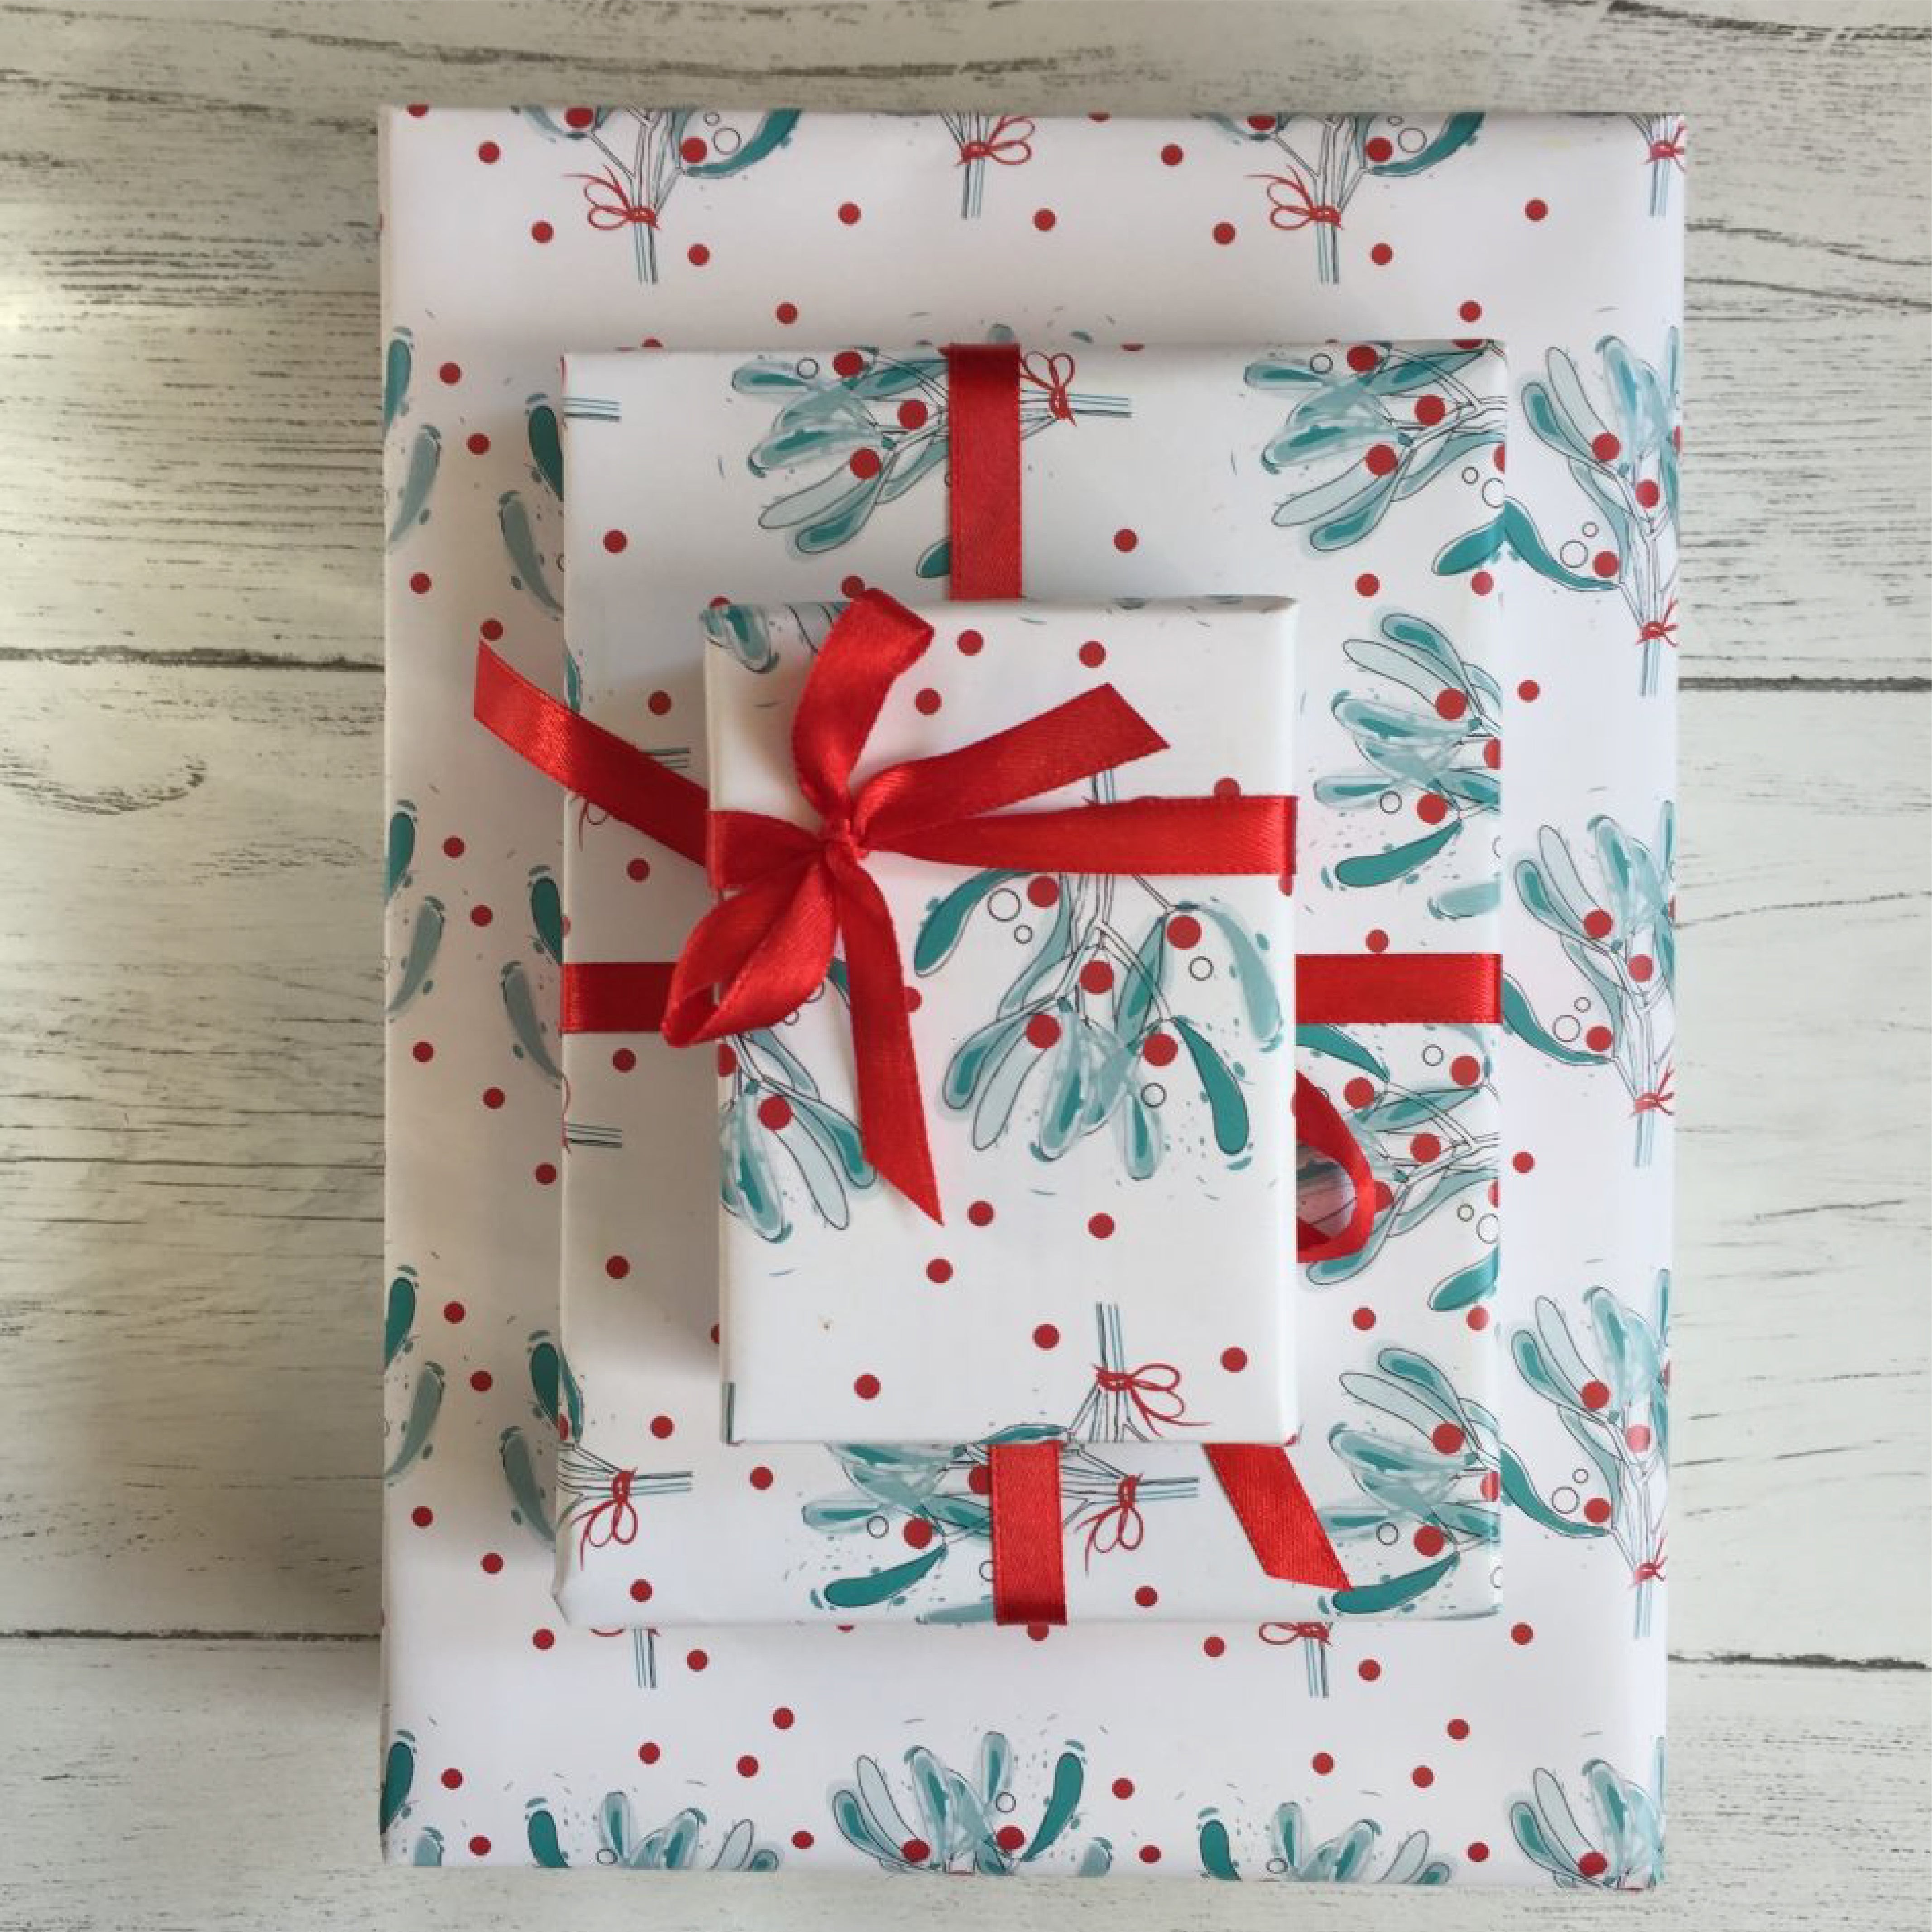 Festive wrapping paper - various designs